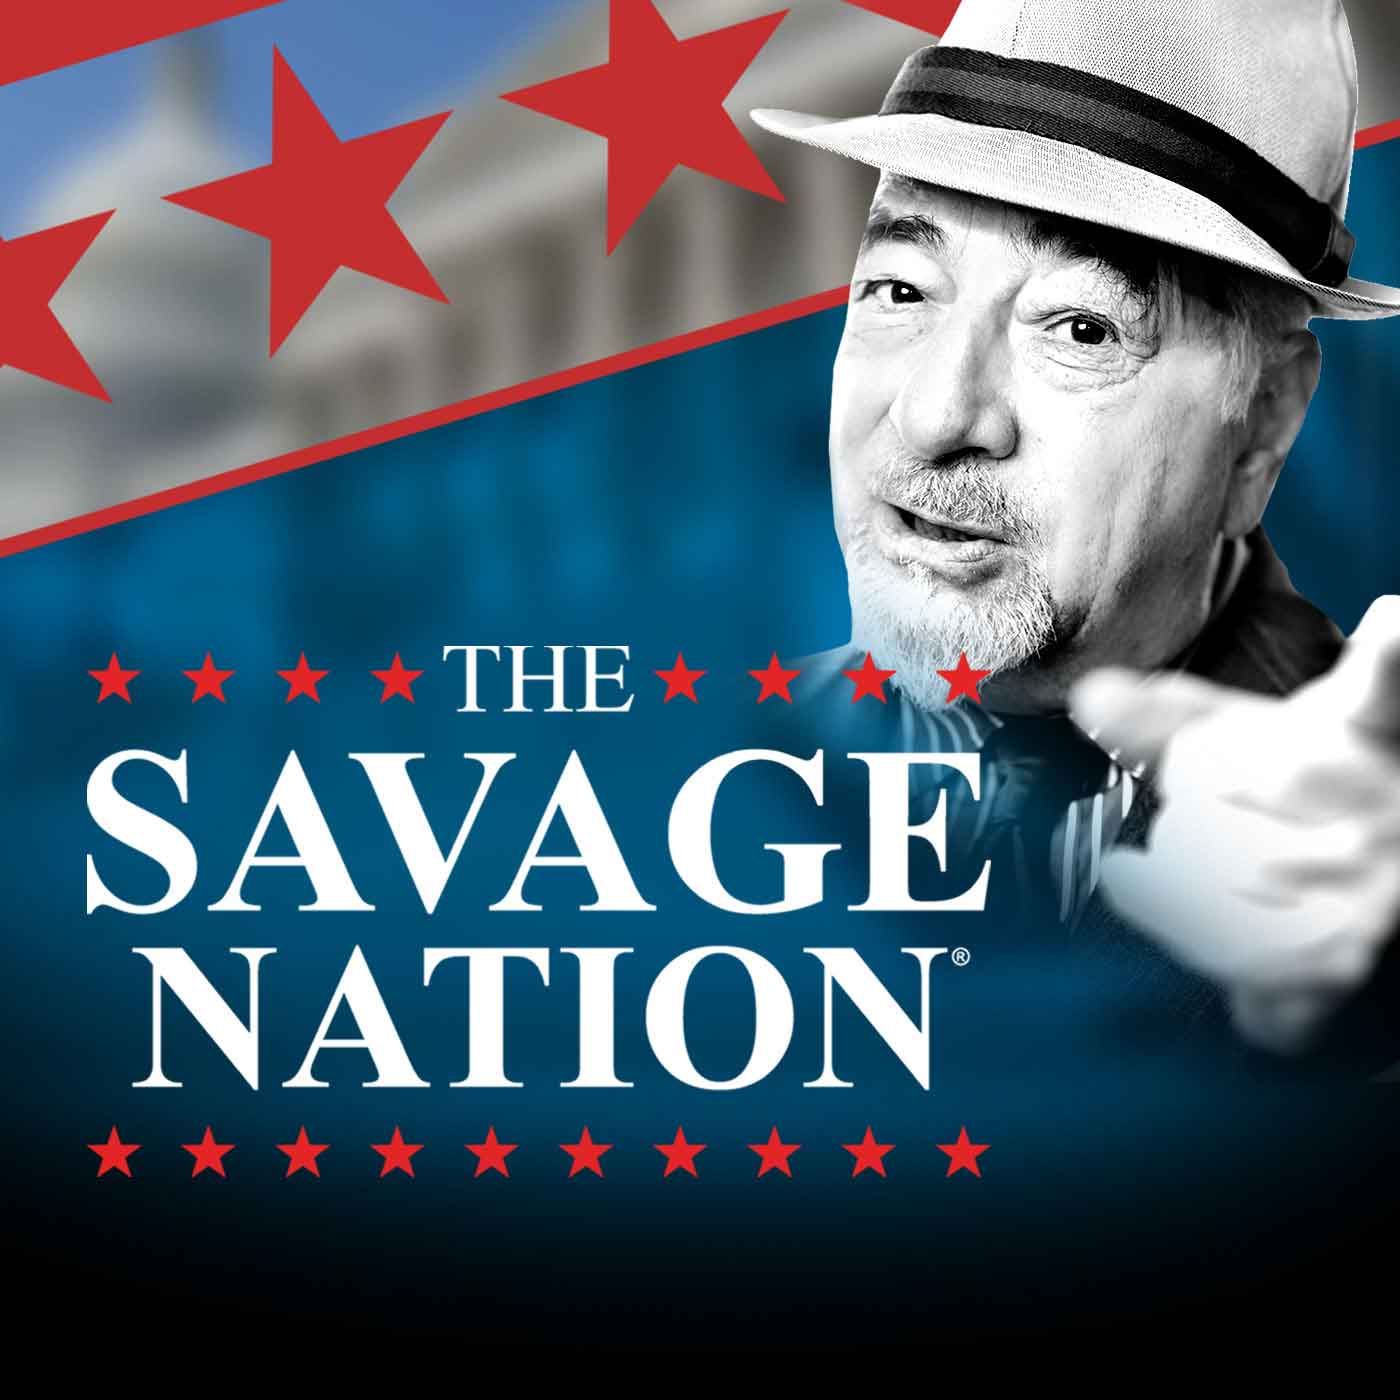 MICHAEL SAVAGE CELEBRATES 25 YEARS IN RADIO AS ONE OF AMERICA’S MOST INFLUENTIAL TALK HOSTS